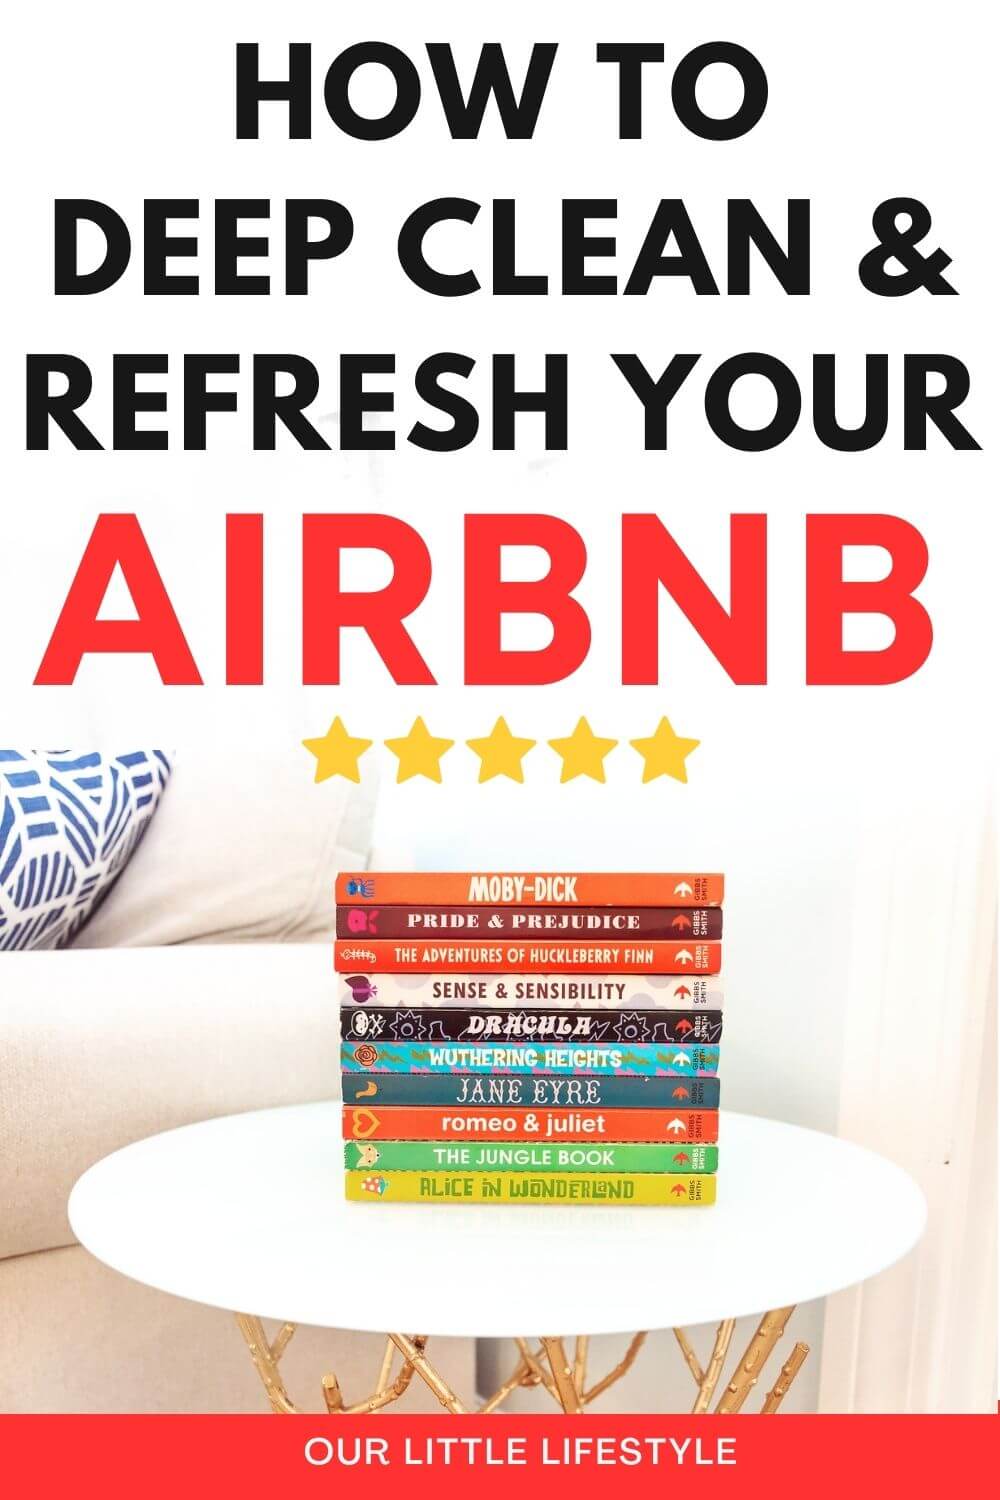 Airbnb Cleaning Checklist For Deep Cleans Off Season